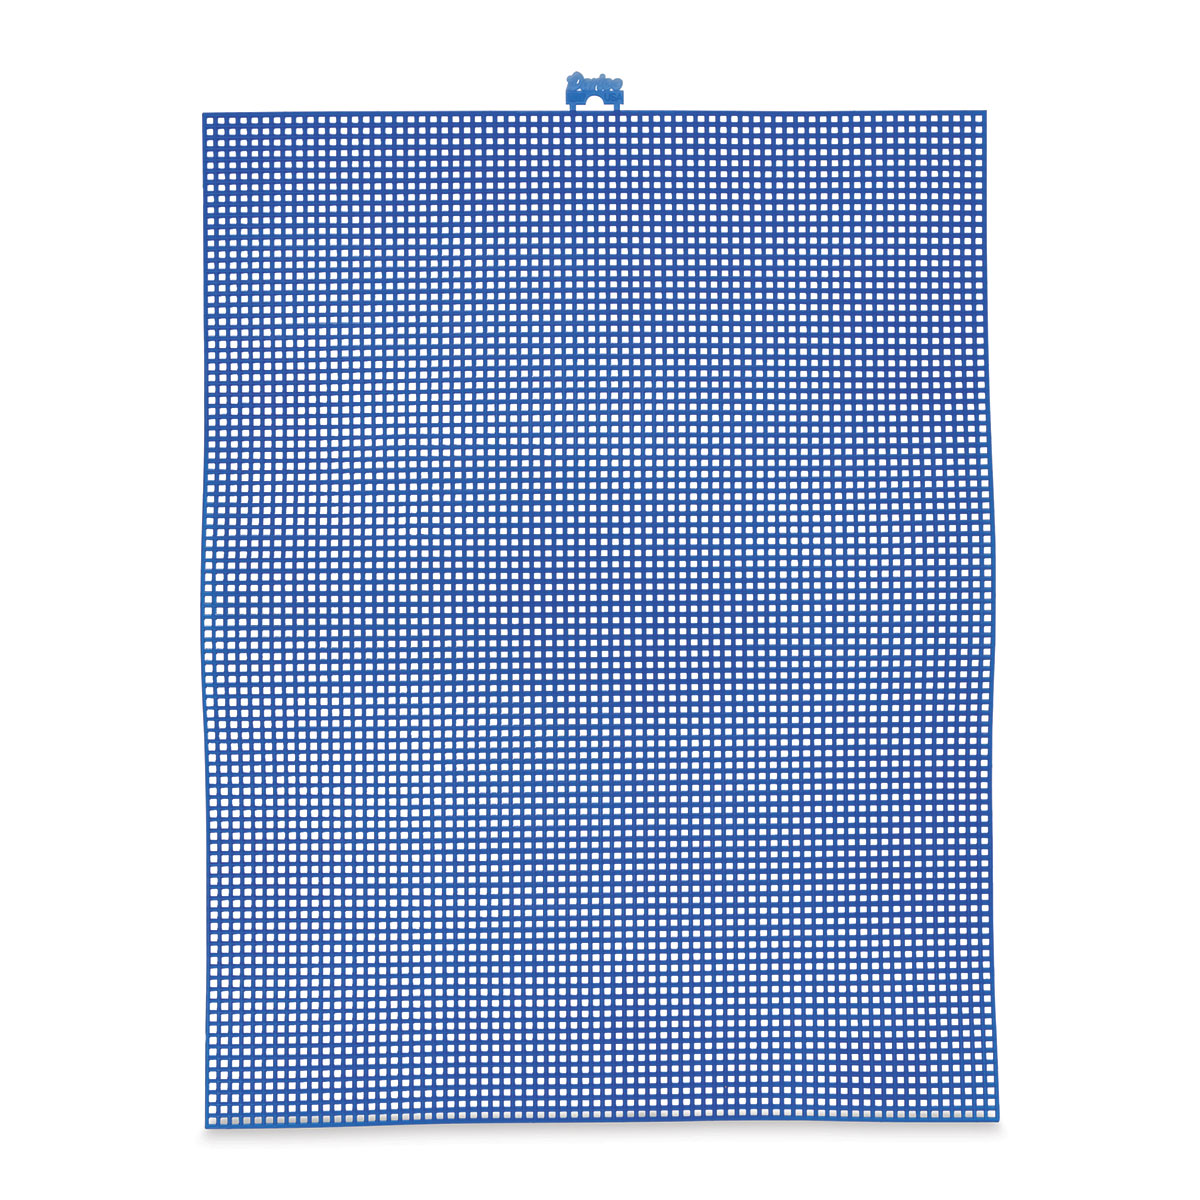 Plastic Canvas Sheets - 10 1/2 x 13 1/2 - Choose From Many Colors